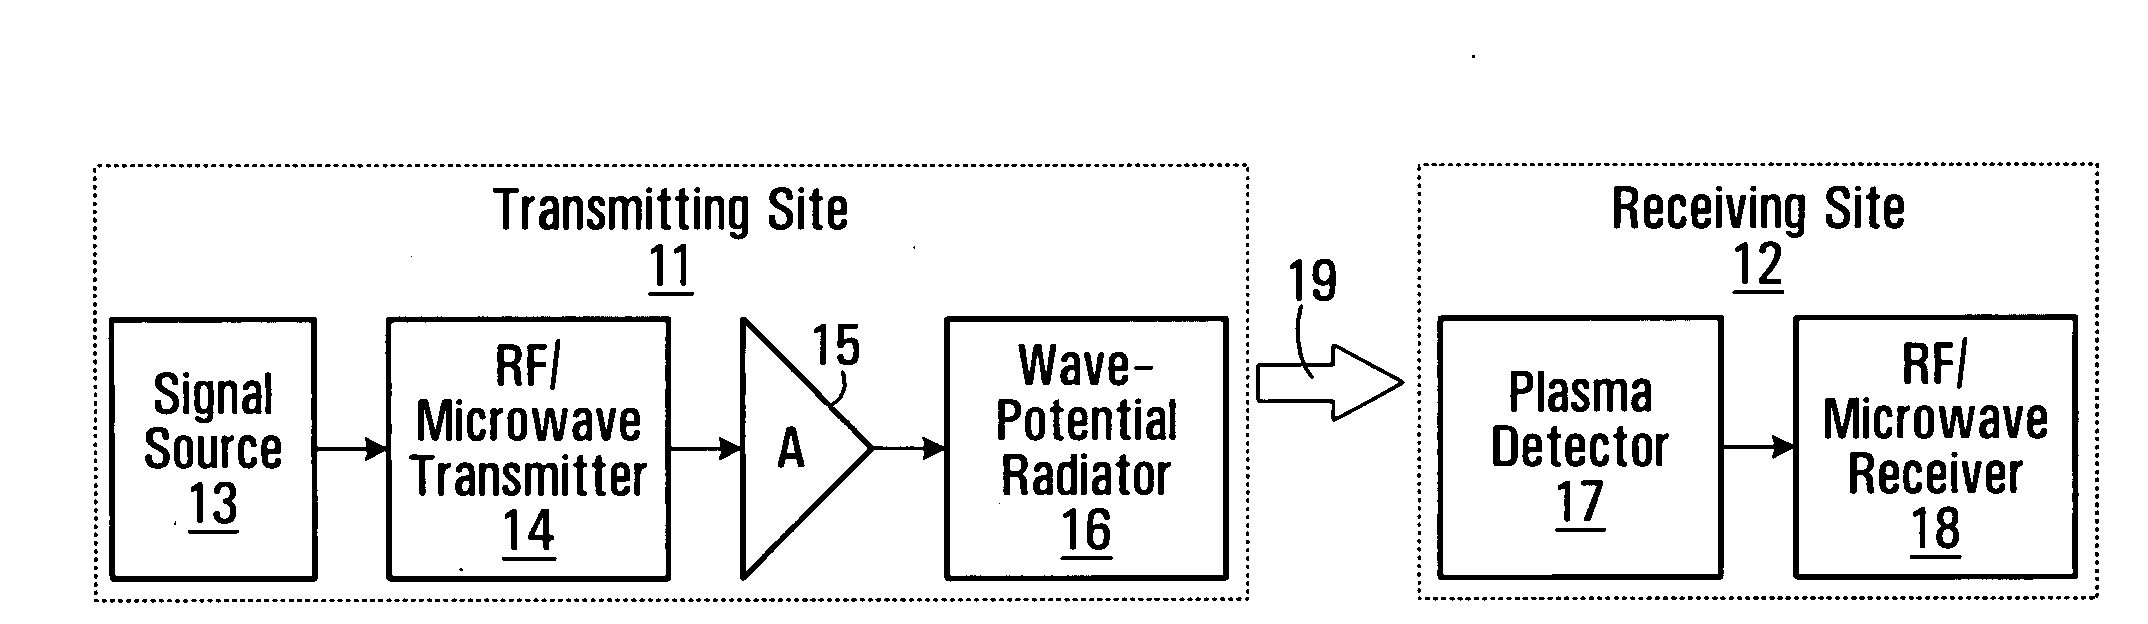 Electromagnetic wave-potential communication system